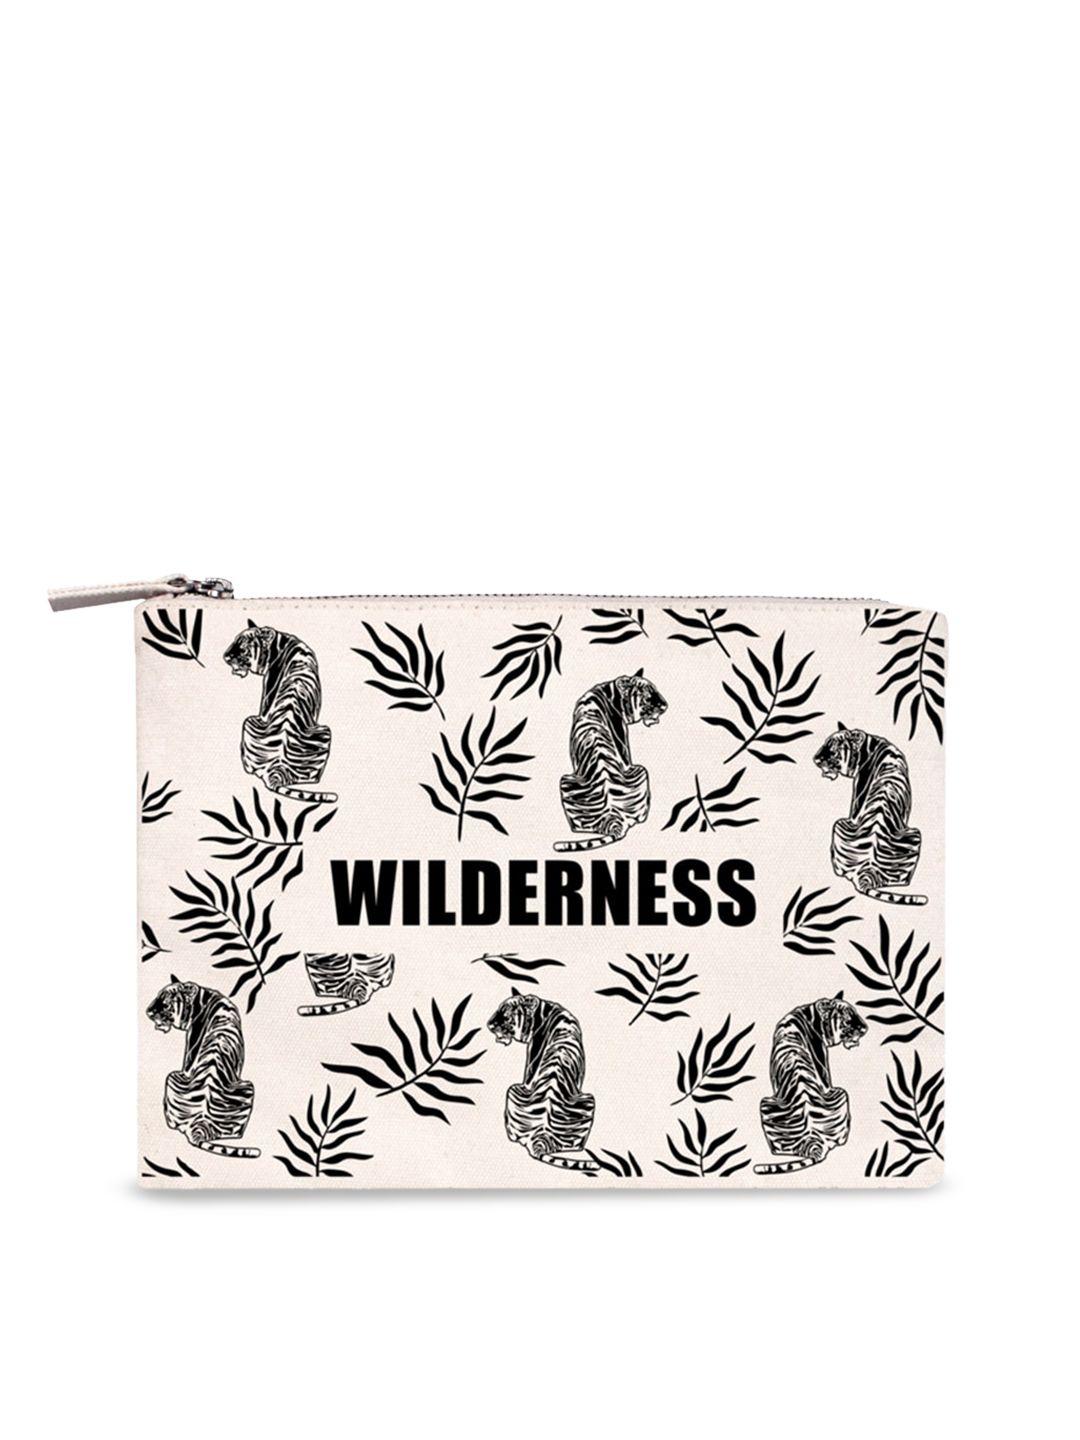 colorbar printed co-earth wilderness flat pouch